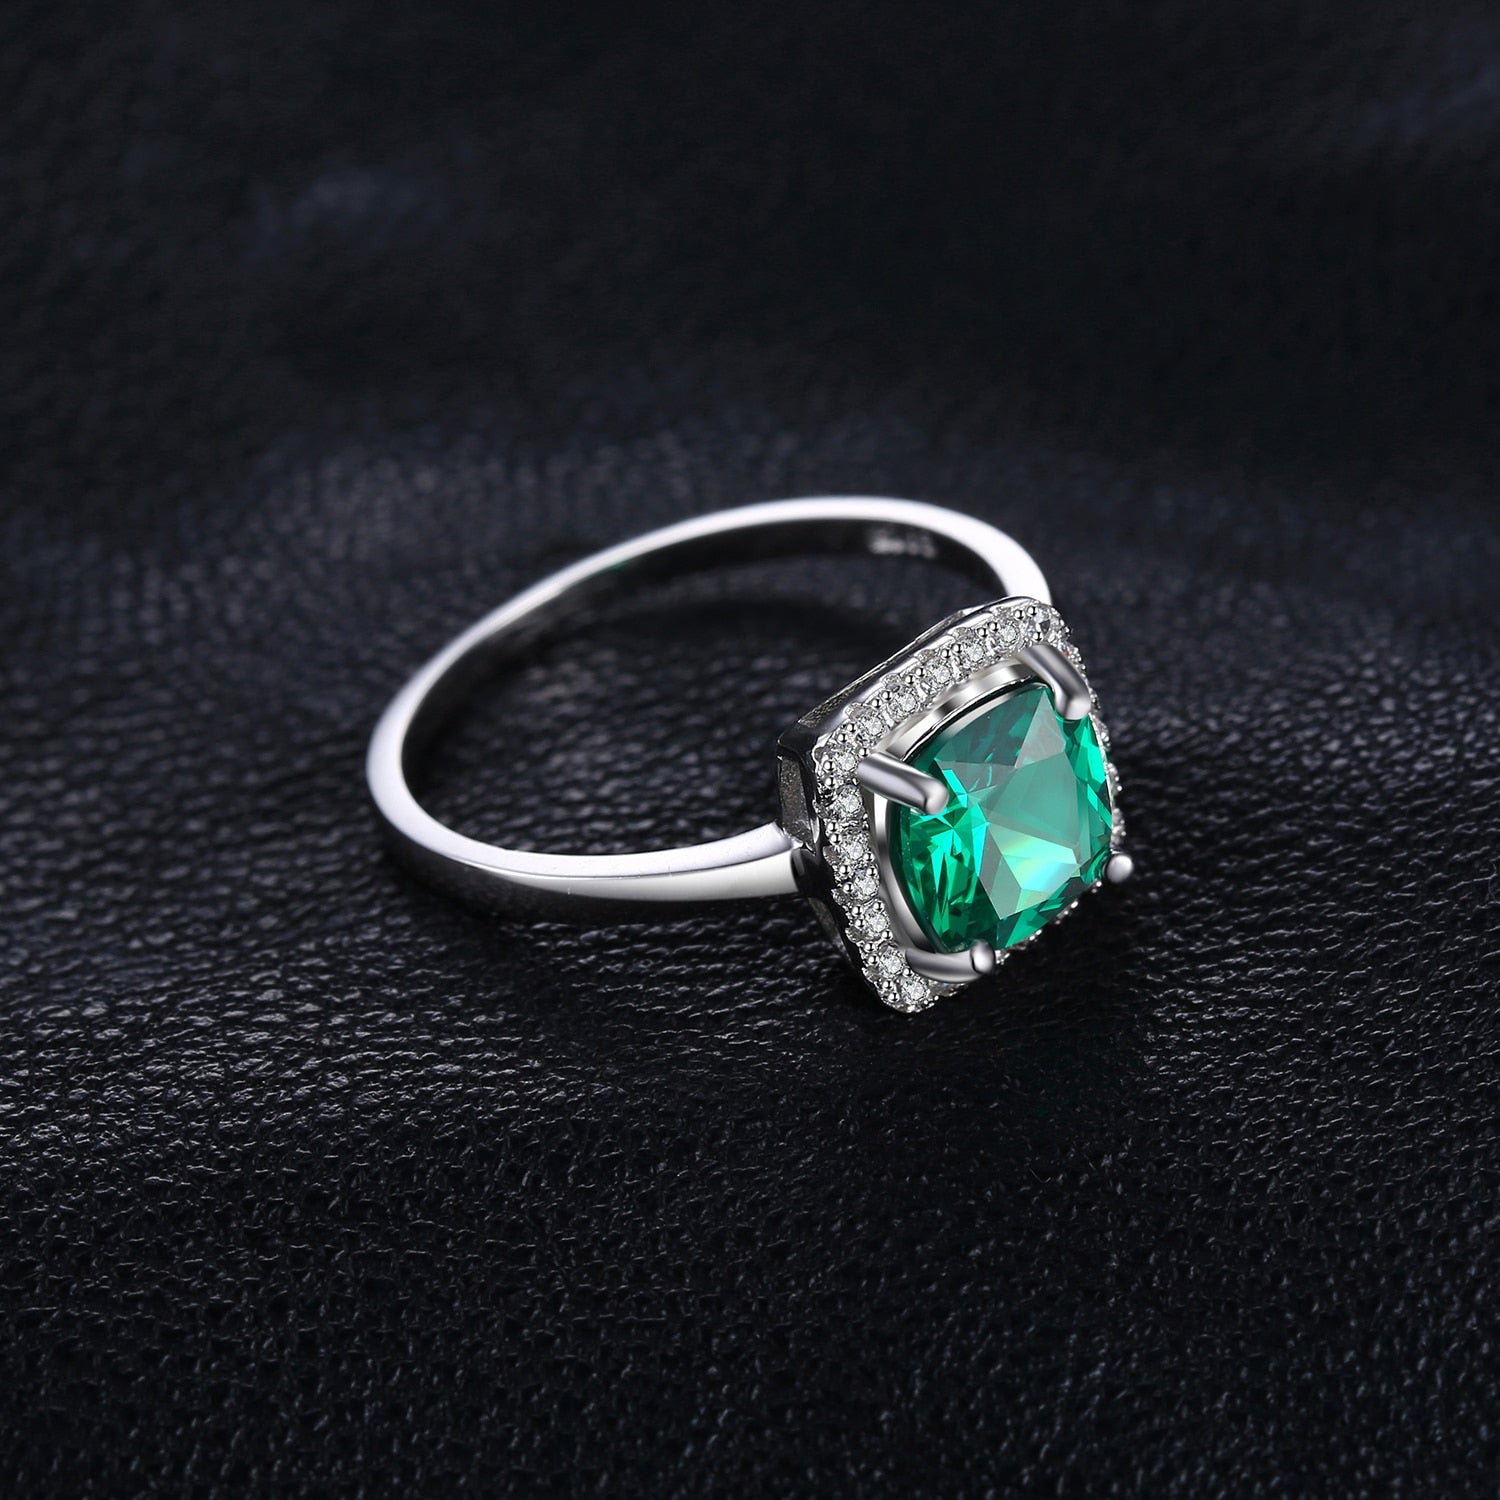 Green Simulated Nano Emerald 925 Sterling Silver Women's Ring